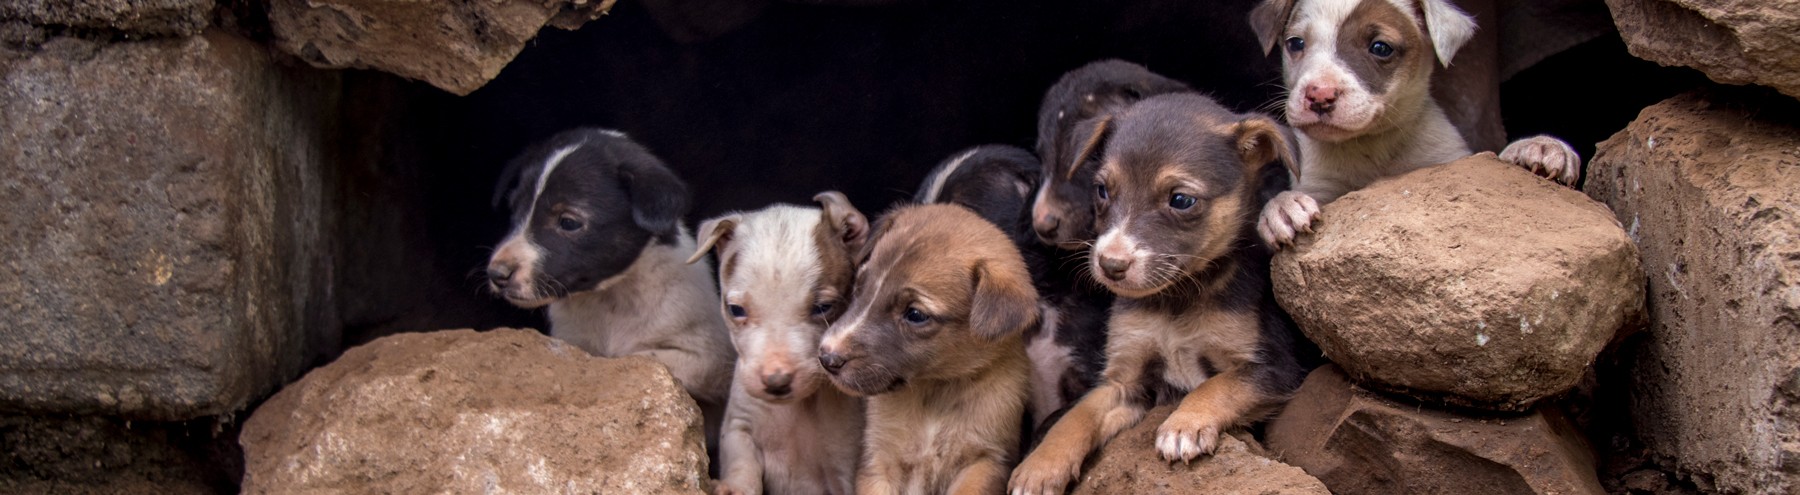 Litter of 9 puppies taking shelter in a stone wall near the vaccination drive in Kenya